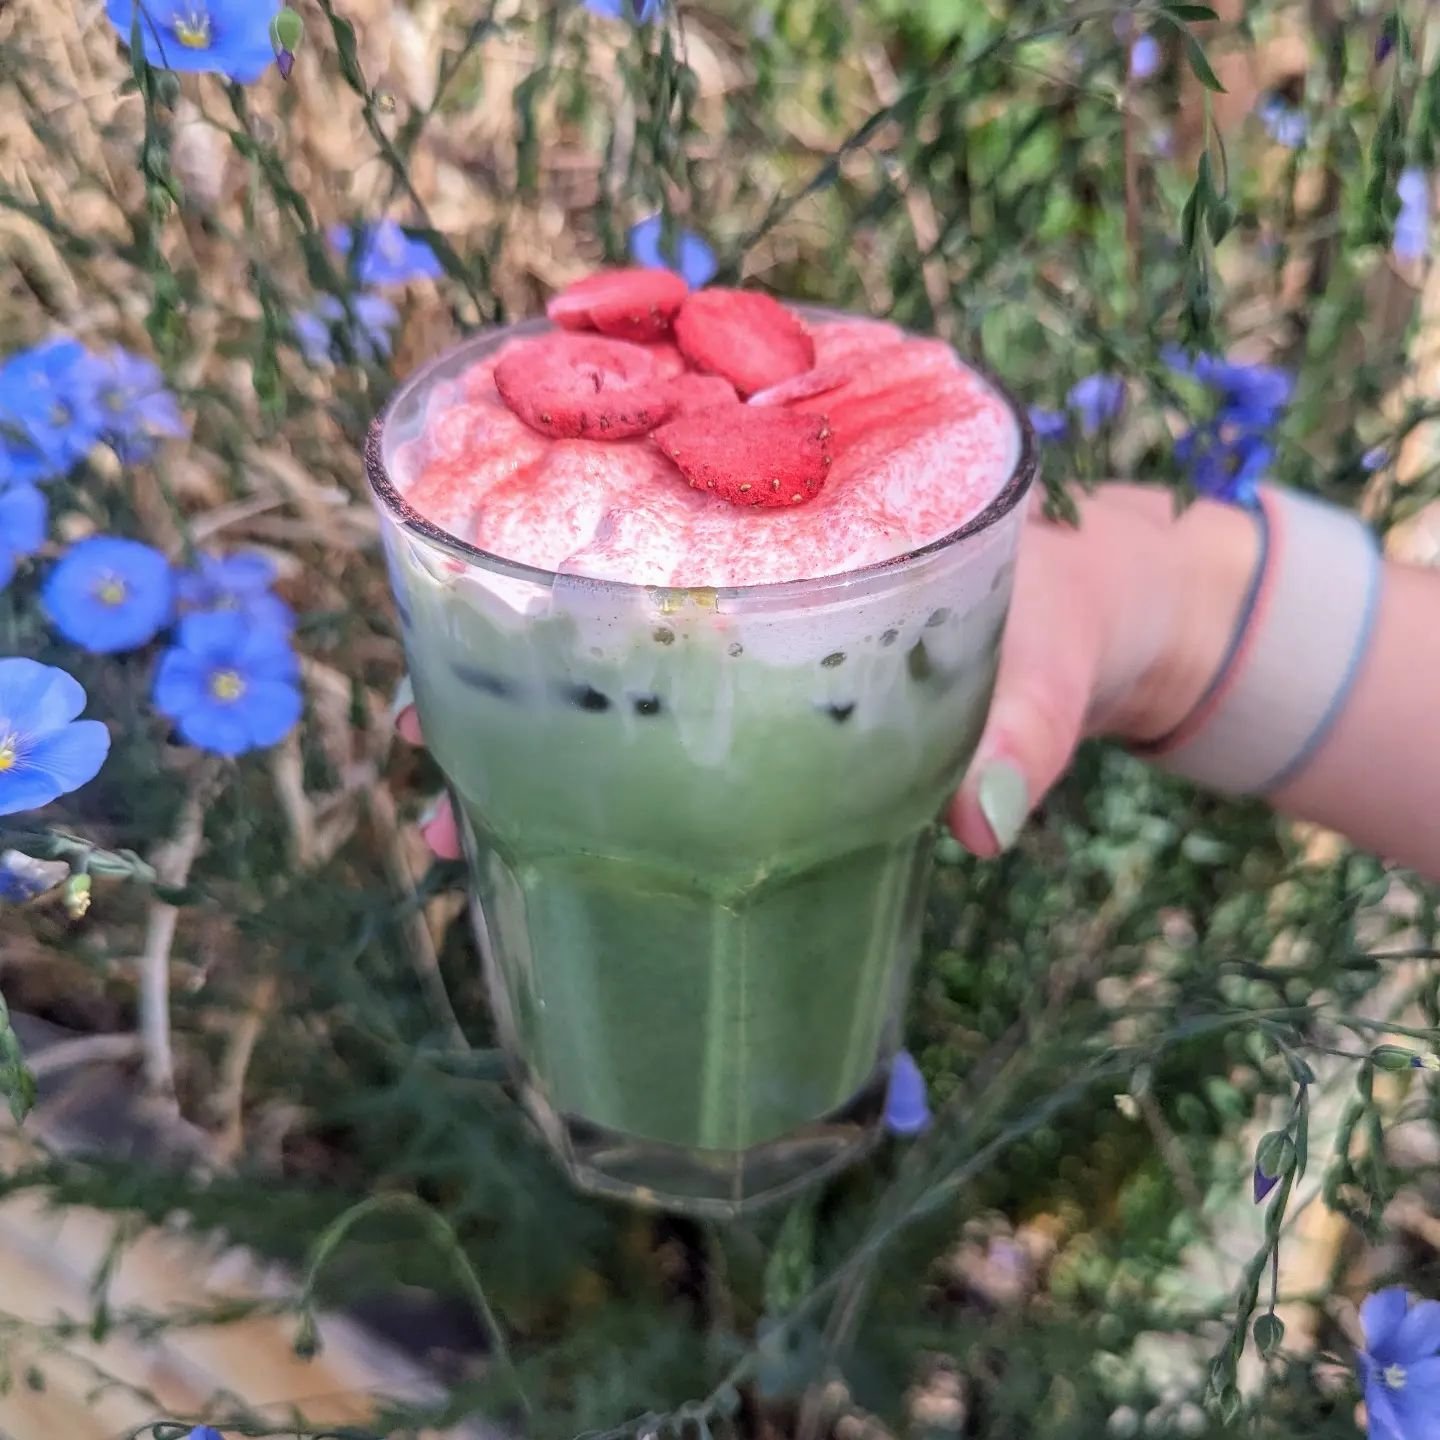 New drank, who dis???! Introducing 🍓Strawberry Fields Forever 🍓 Matcha with strawberry cold foam, finished with a strawberry dust 🍓 Its the perfect ring in Spring drink! #flyingm #downtownampa